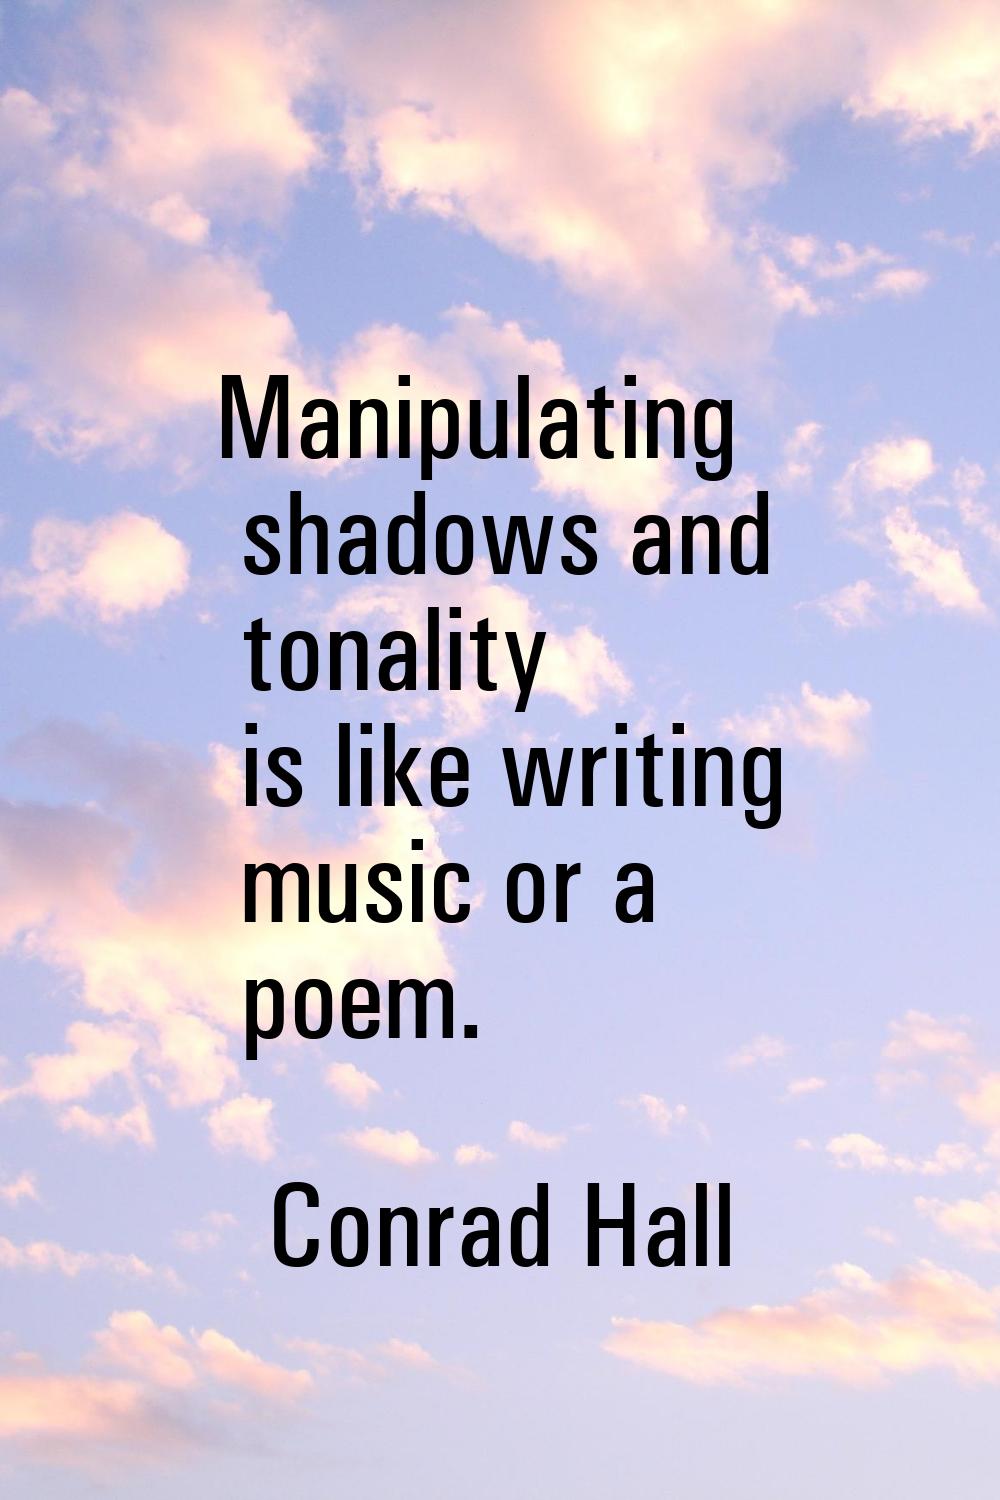 Manipulating shadows and tonality is like writing music or a poem.